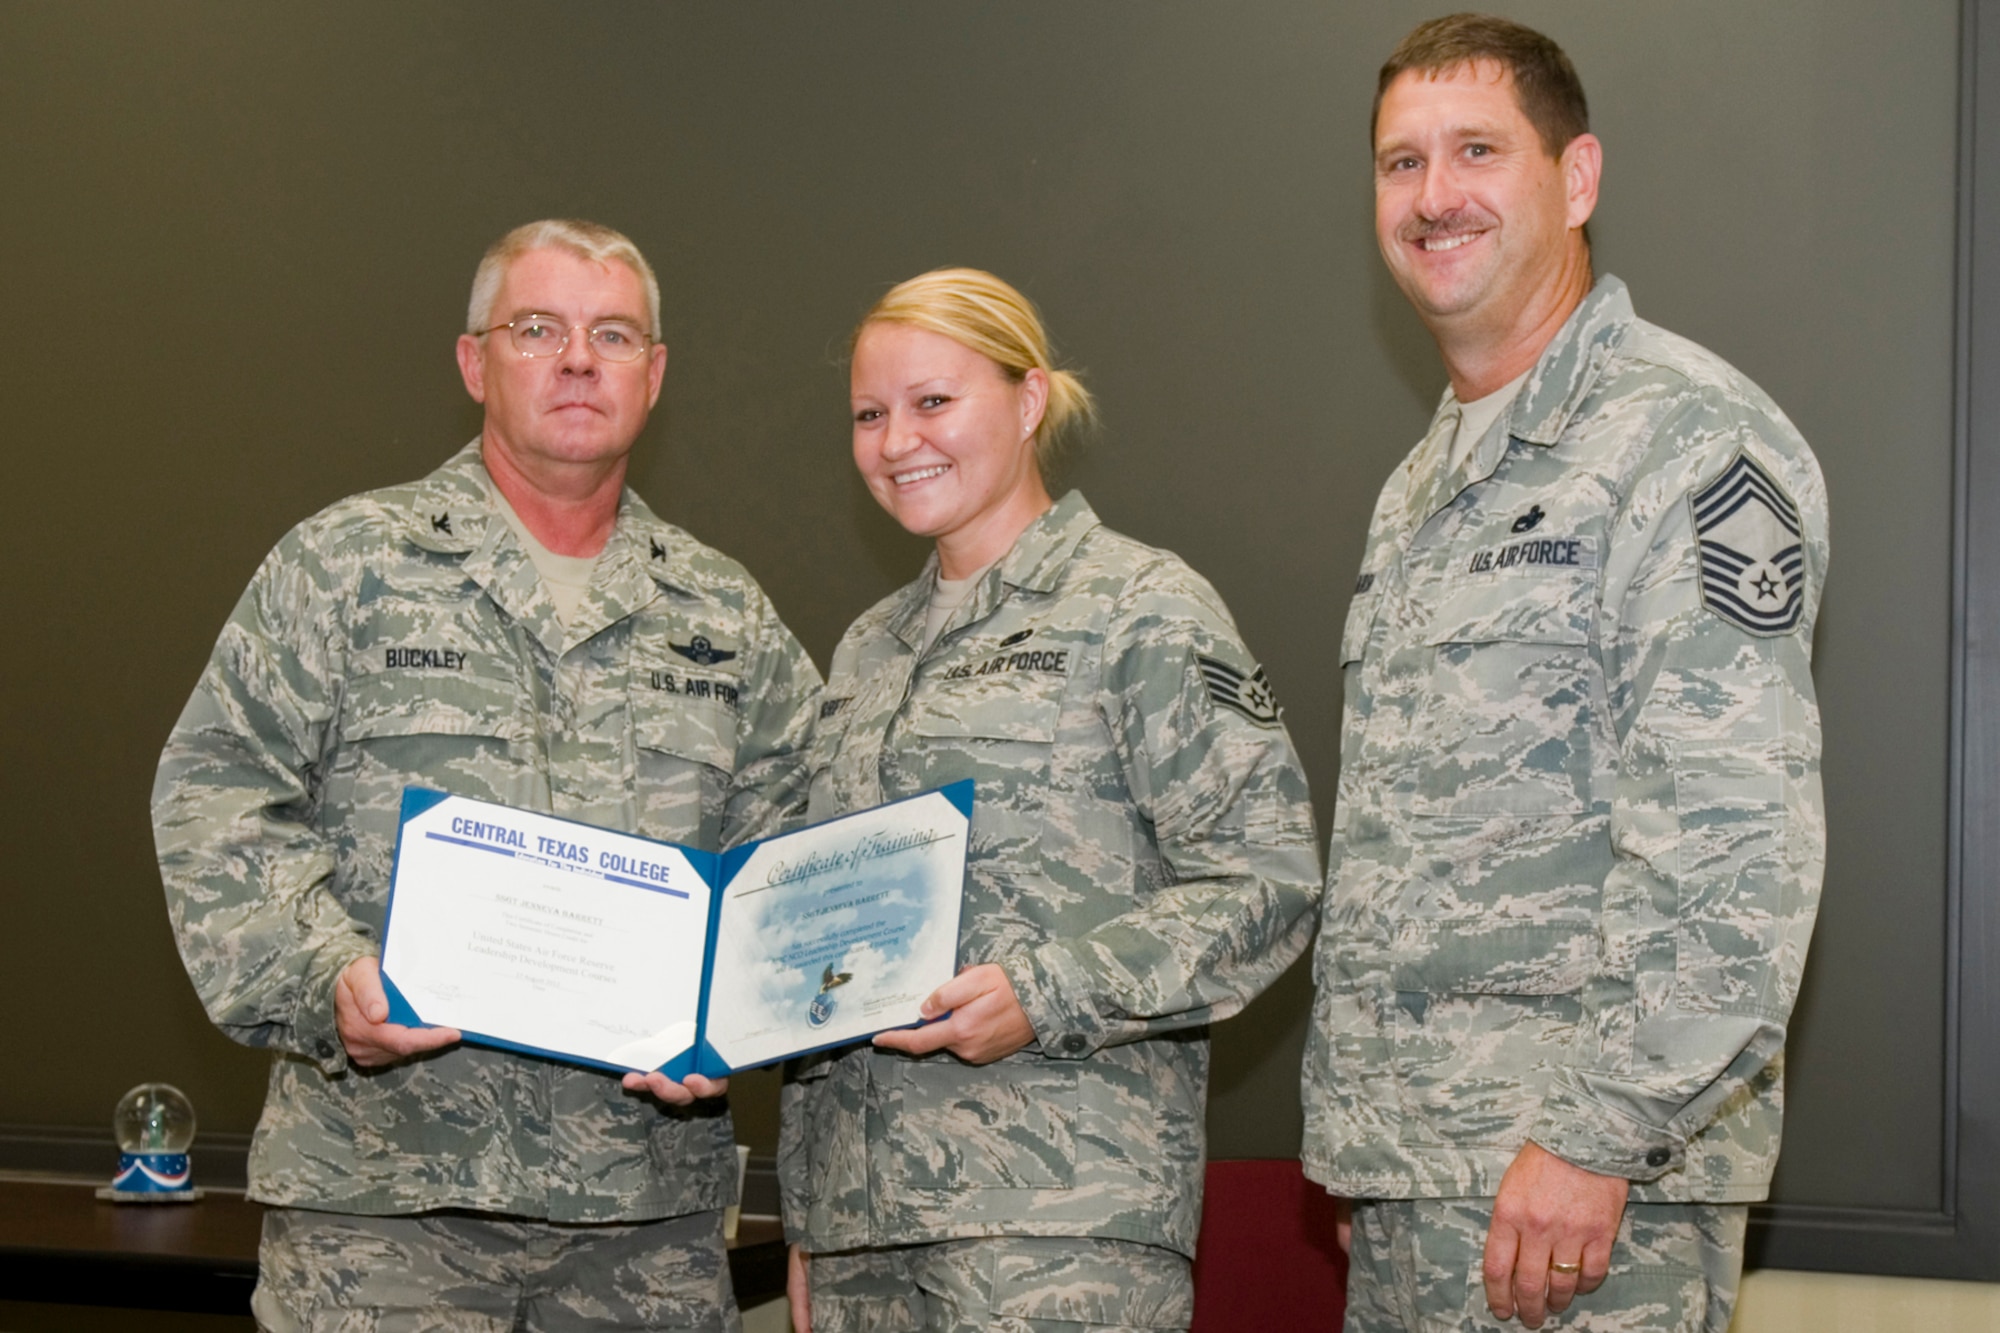 GRISSOM AIR RESERVE BASE, Ind. -- Staff Sgt. Jenneva Barrett, 434th Logistics Readiness Squadron fuels supply technician, receives a certificate of training from Col. Don Buckley, 434th Air Refueling Wing commander, and Chief Master Sergeant James Burba, 434th Maintenance Operations Flight maintenance superintendent, at a graduation ceremony for a Non-Commissioned Officer Leadership Development Course here Aug. 17. Barrett graduated the course with 20 other NCOs. (U.S. Air Force photo/Senior Airman Andrew McLaughlin)